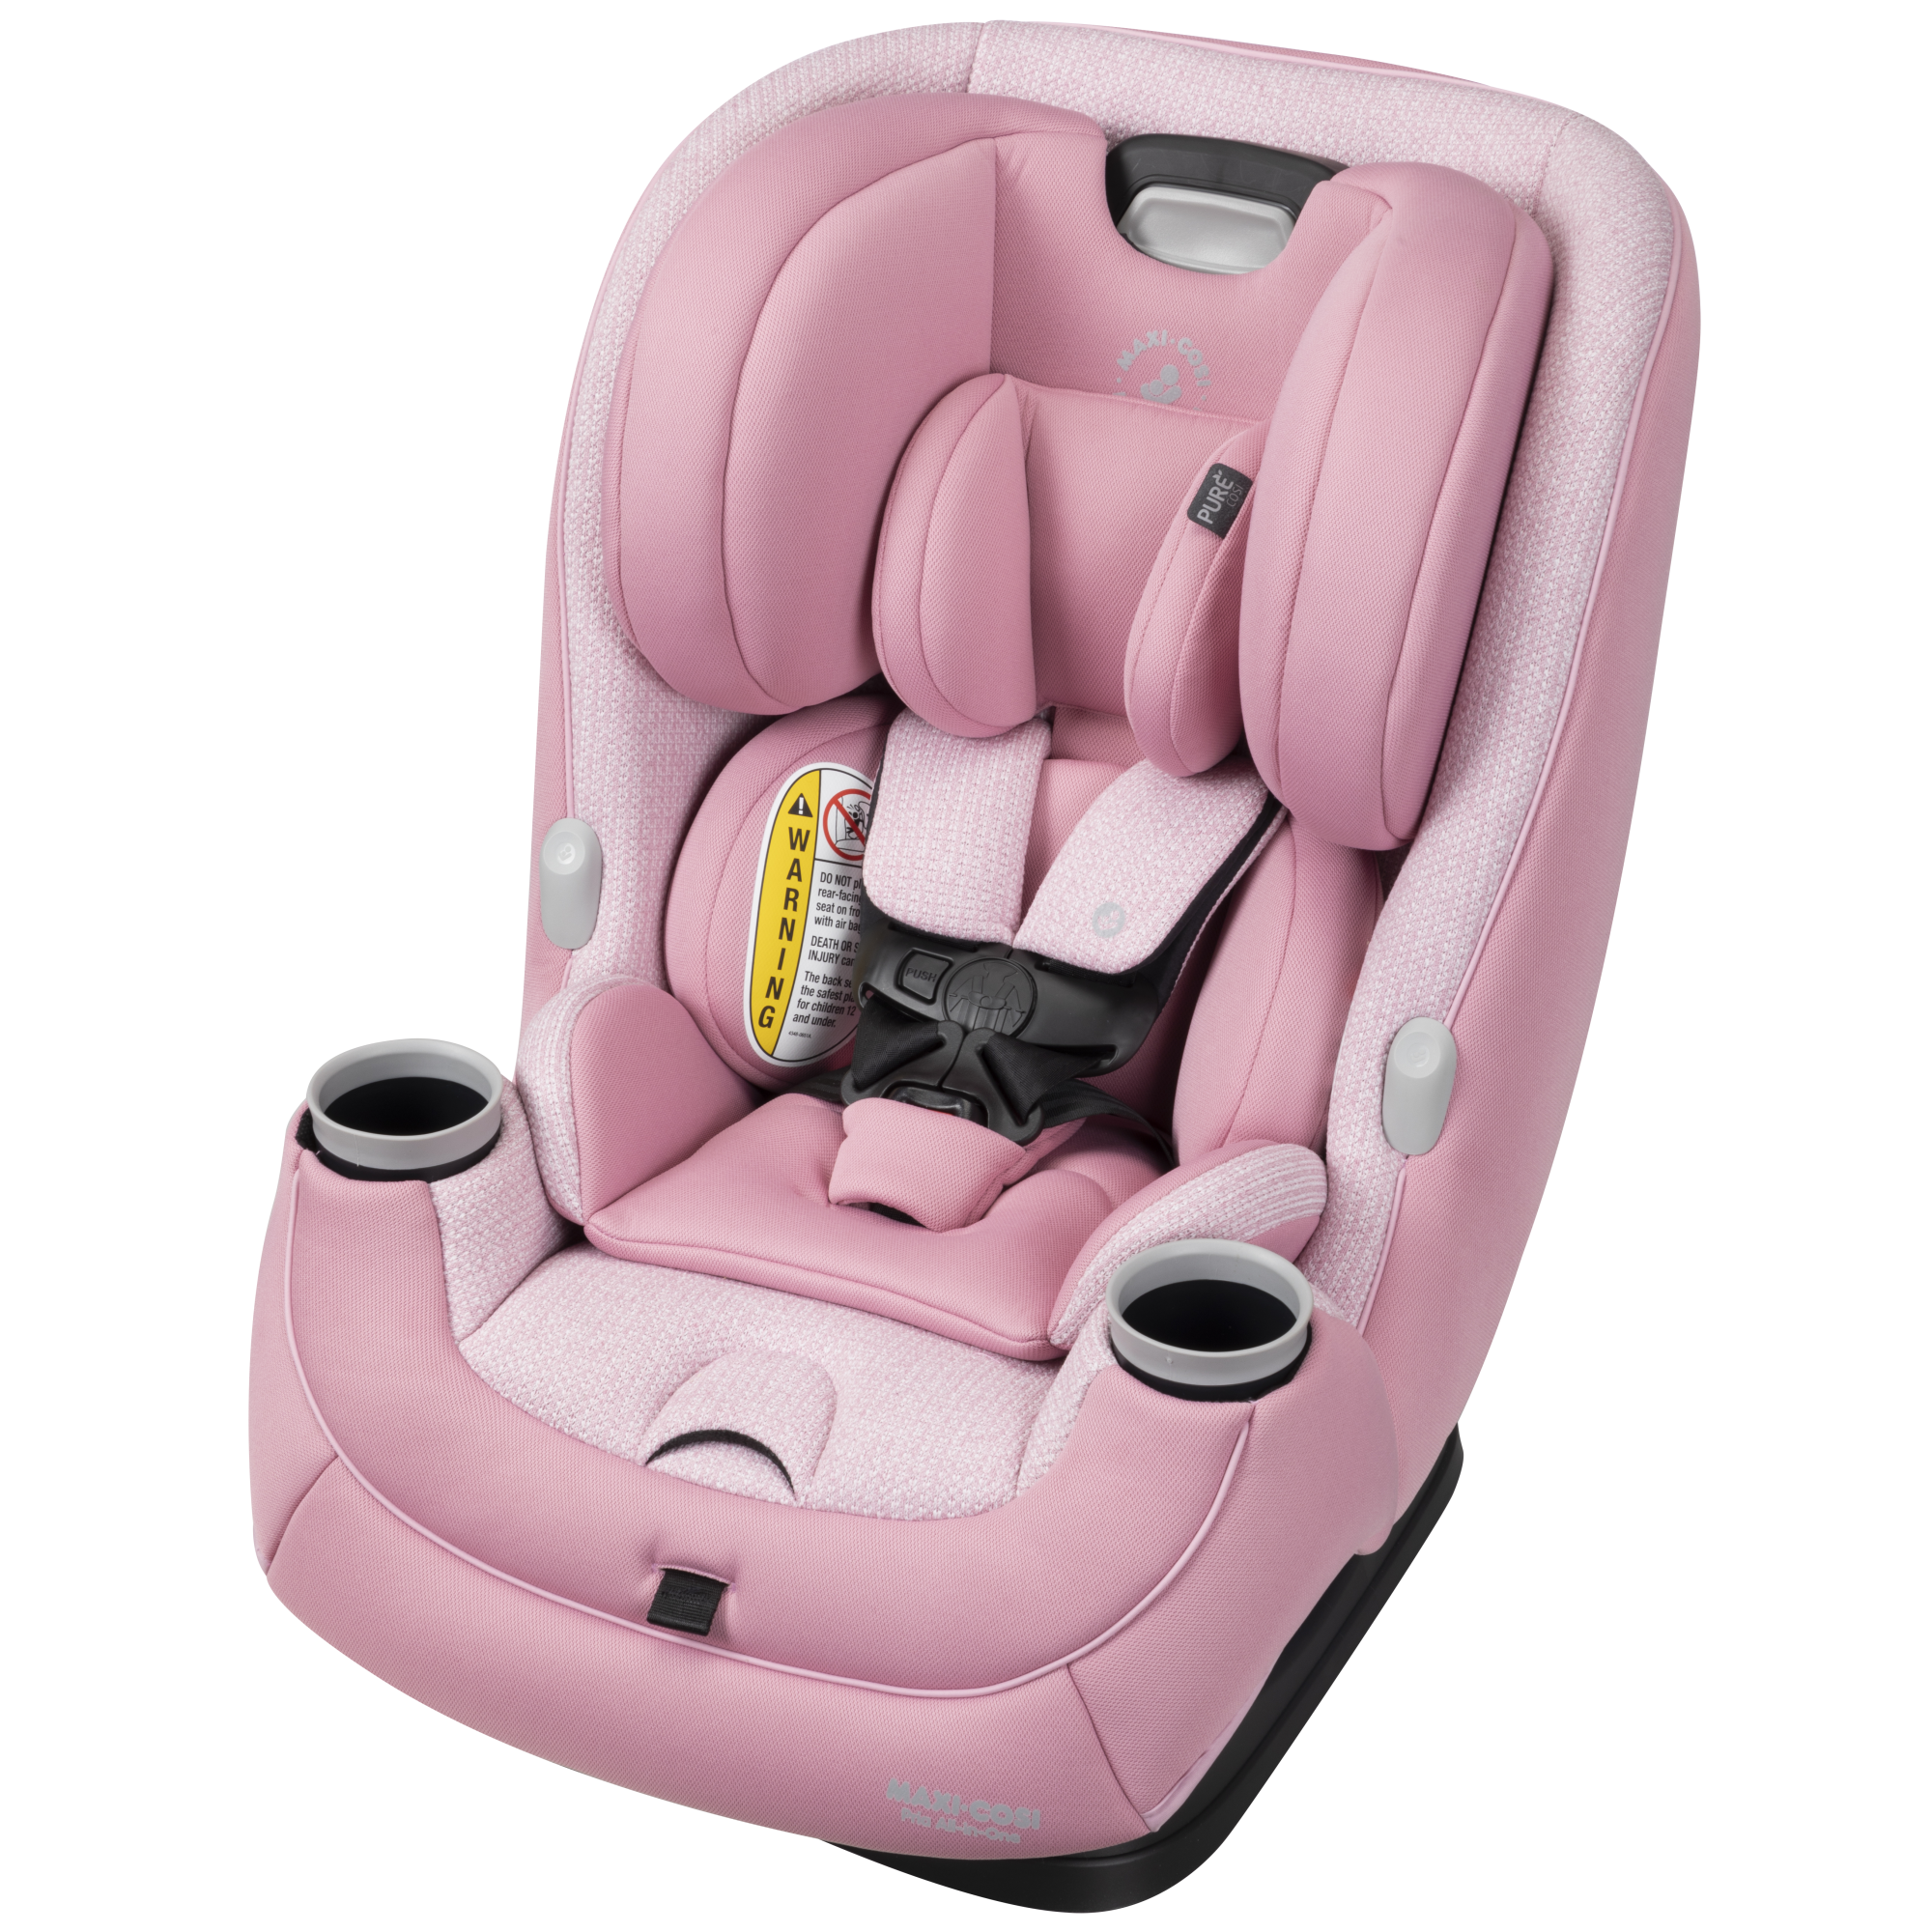 Pria Convertible Car Seat in Color Rose Pink Sweater - PureCosi - 45 degree angle view of left side